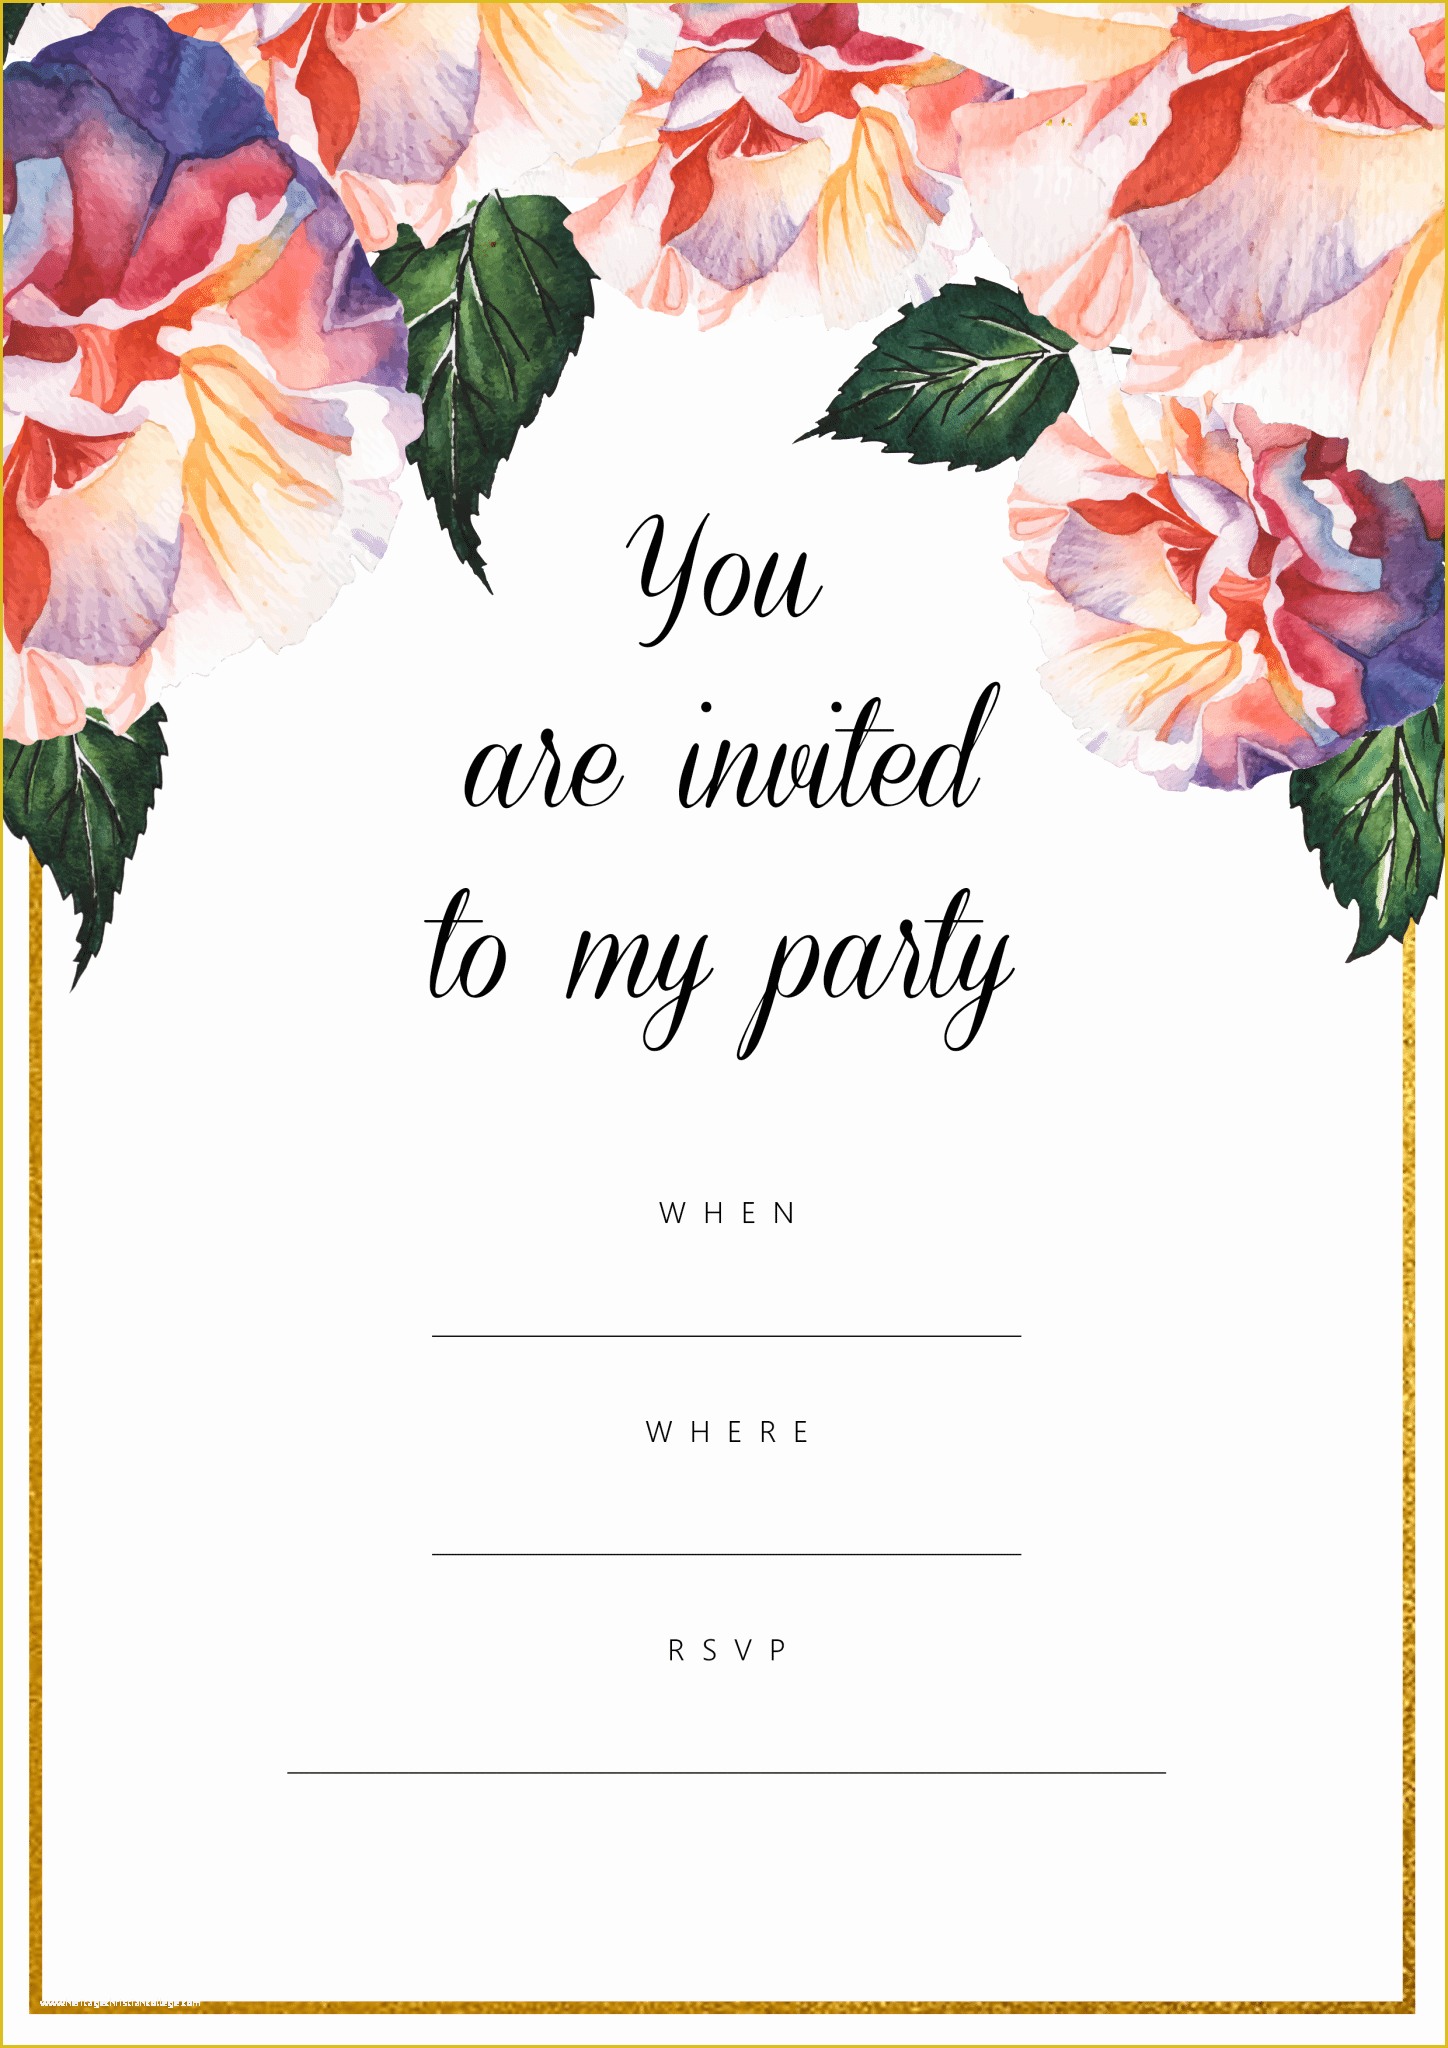 Free Online Invitation Templates Of Free Party Invitations All Free Invitations